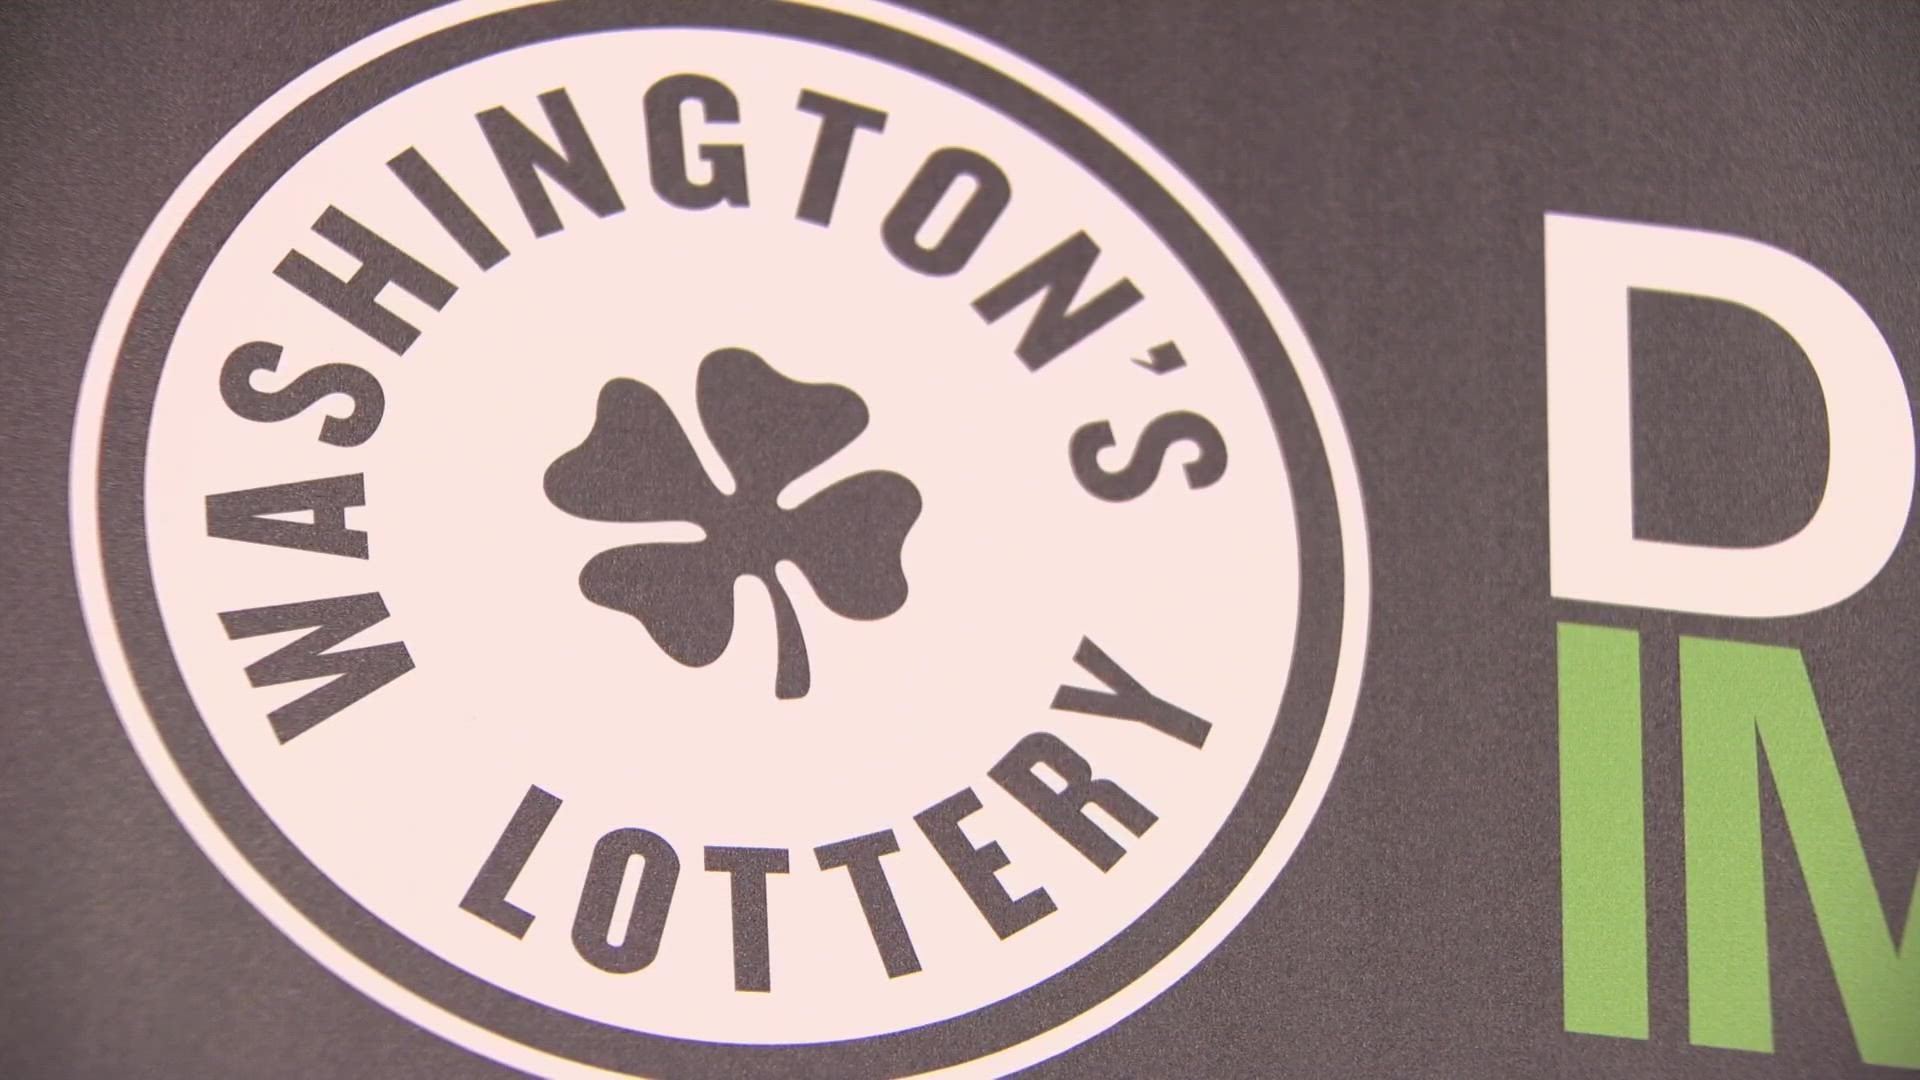 The Fred Meyer store received a $50,000 check for selling the winning Powerball ticket.